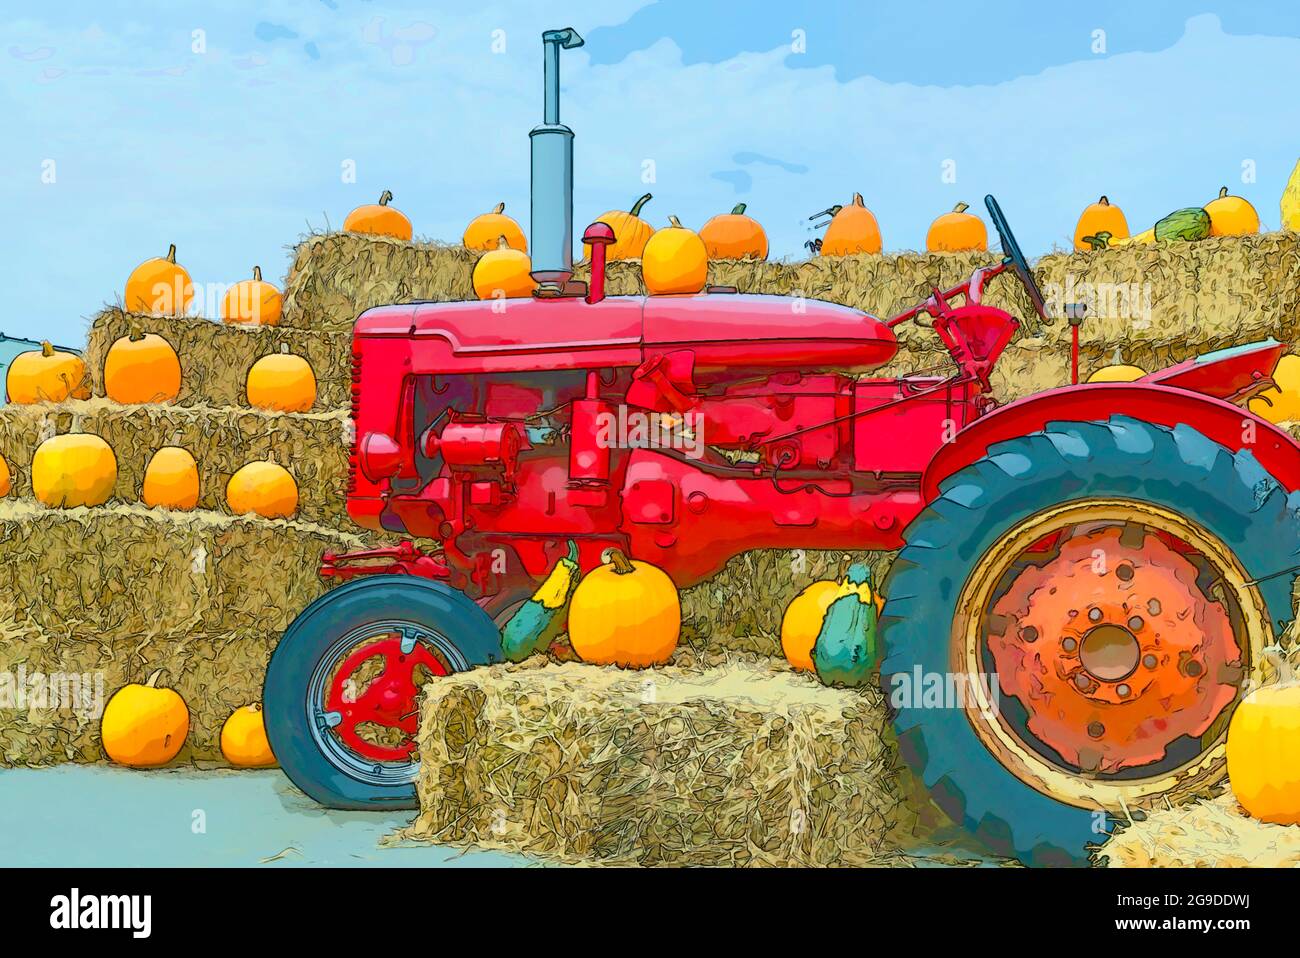 A red tractor stands near briquettes of yellow hay. Orange pumpkins are located on the hay. Blue sky with white clouds at the top. Stock Photo